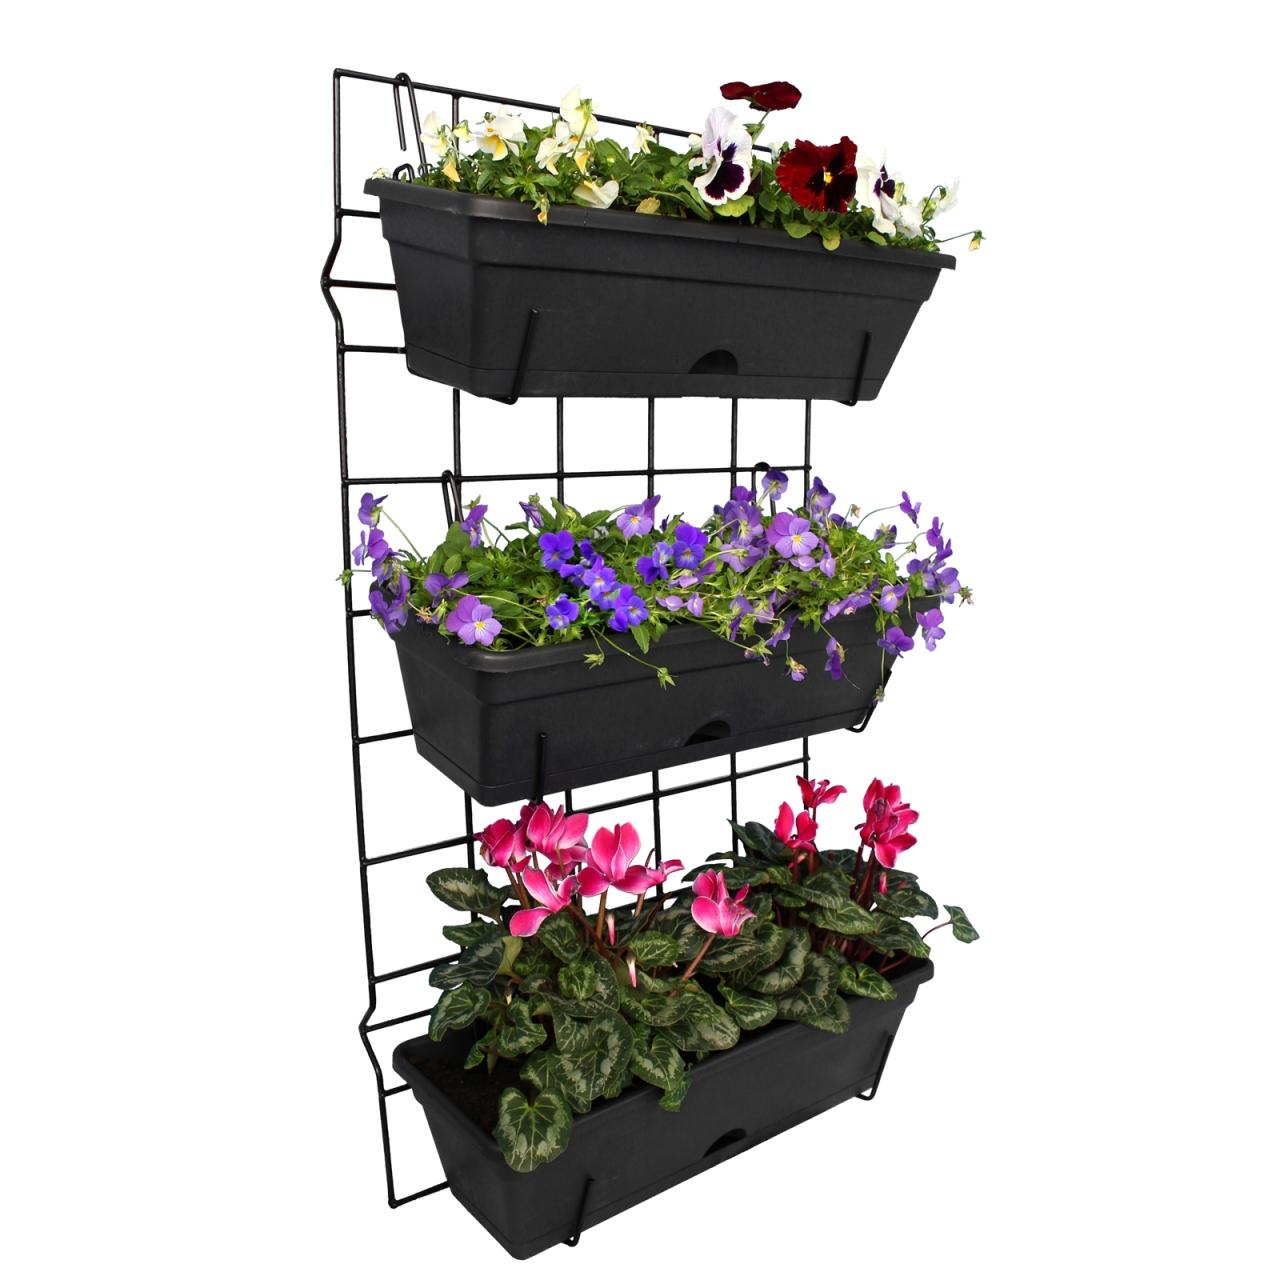 Hanging Plants Indoor | Bunnings Wall Hanging Pots: Elevate Your Decor with Style and Functionality